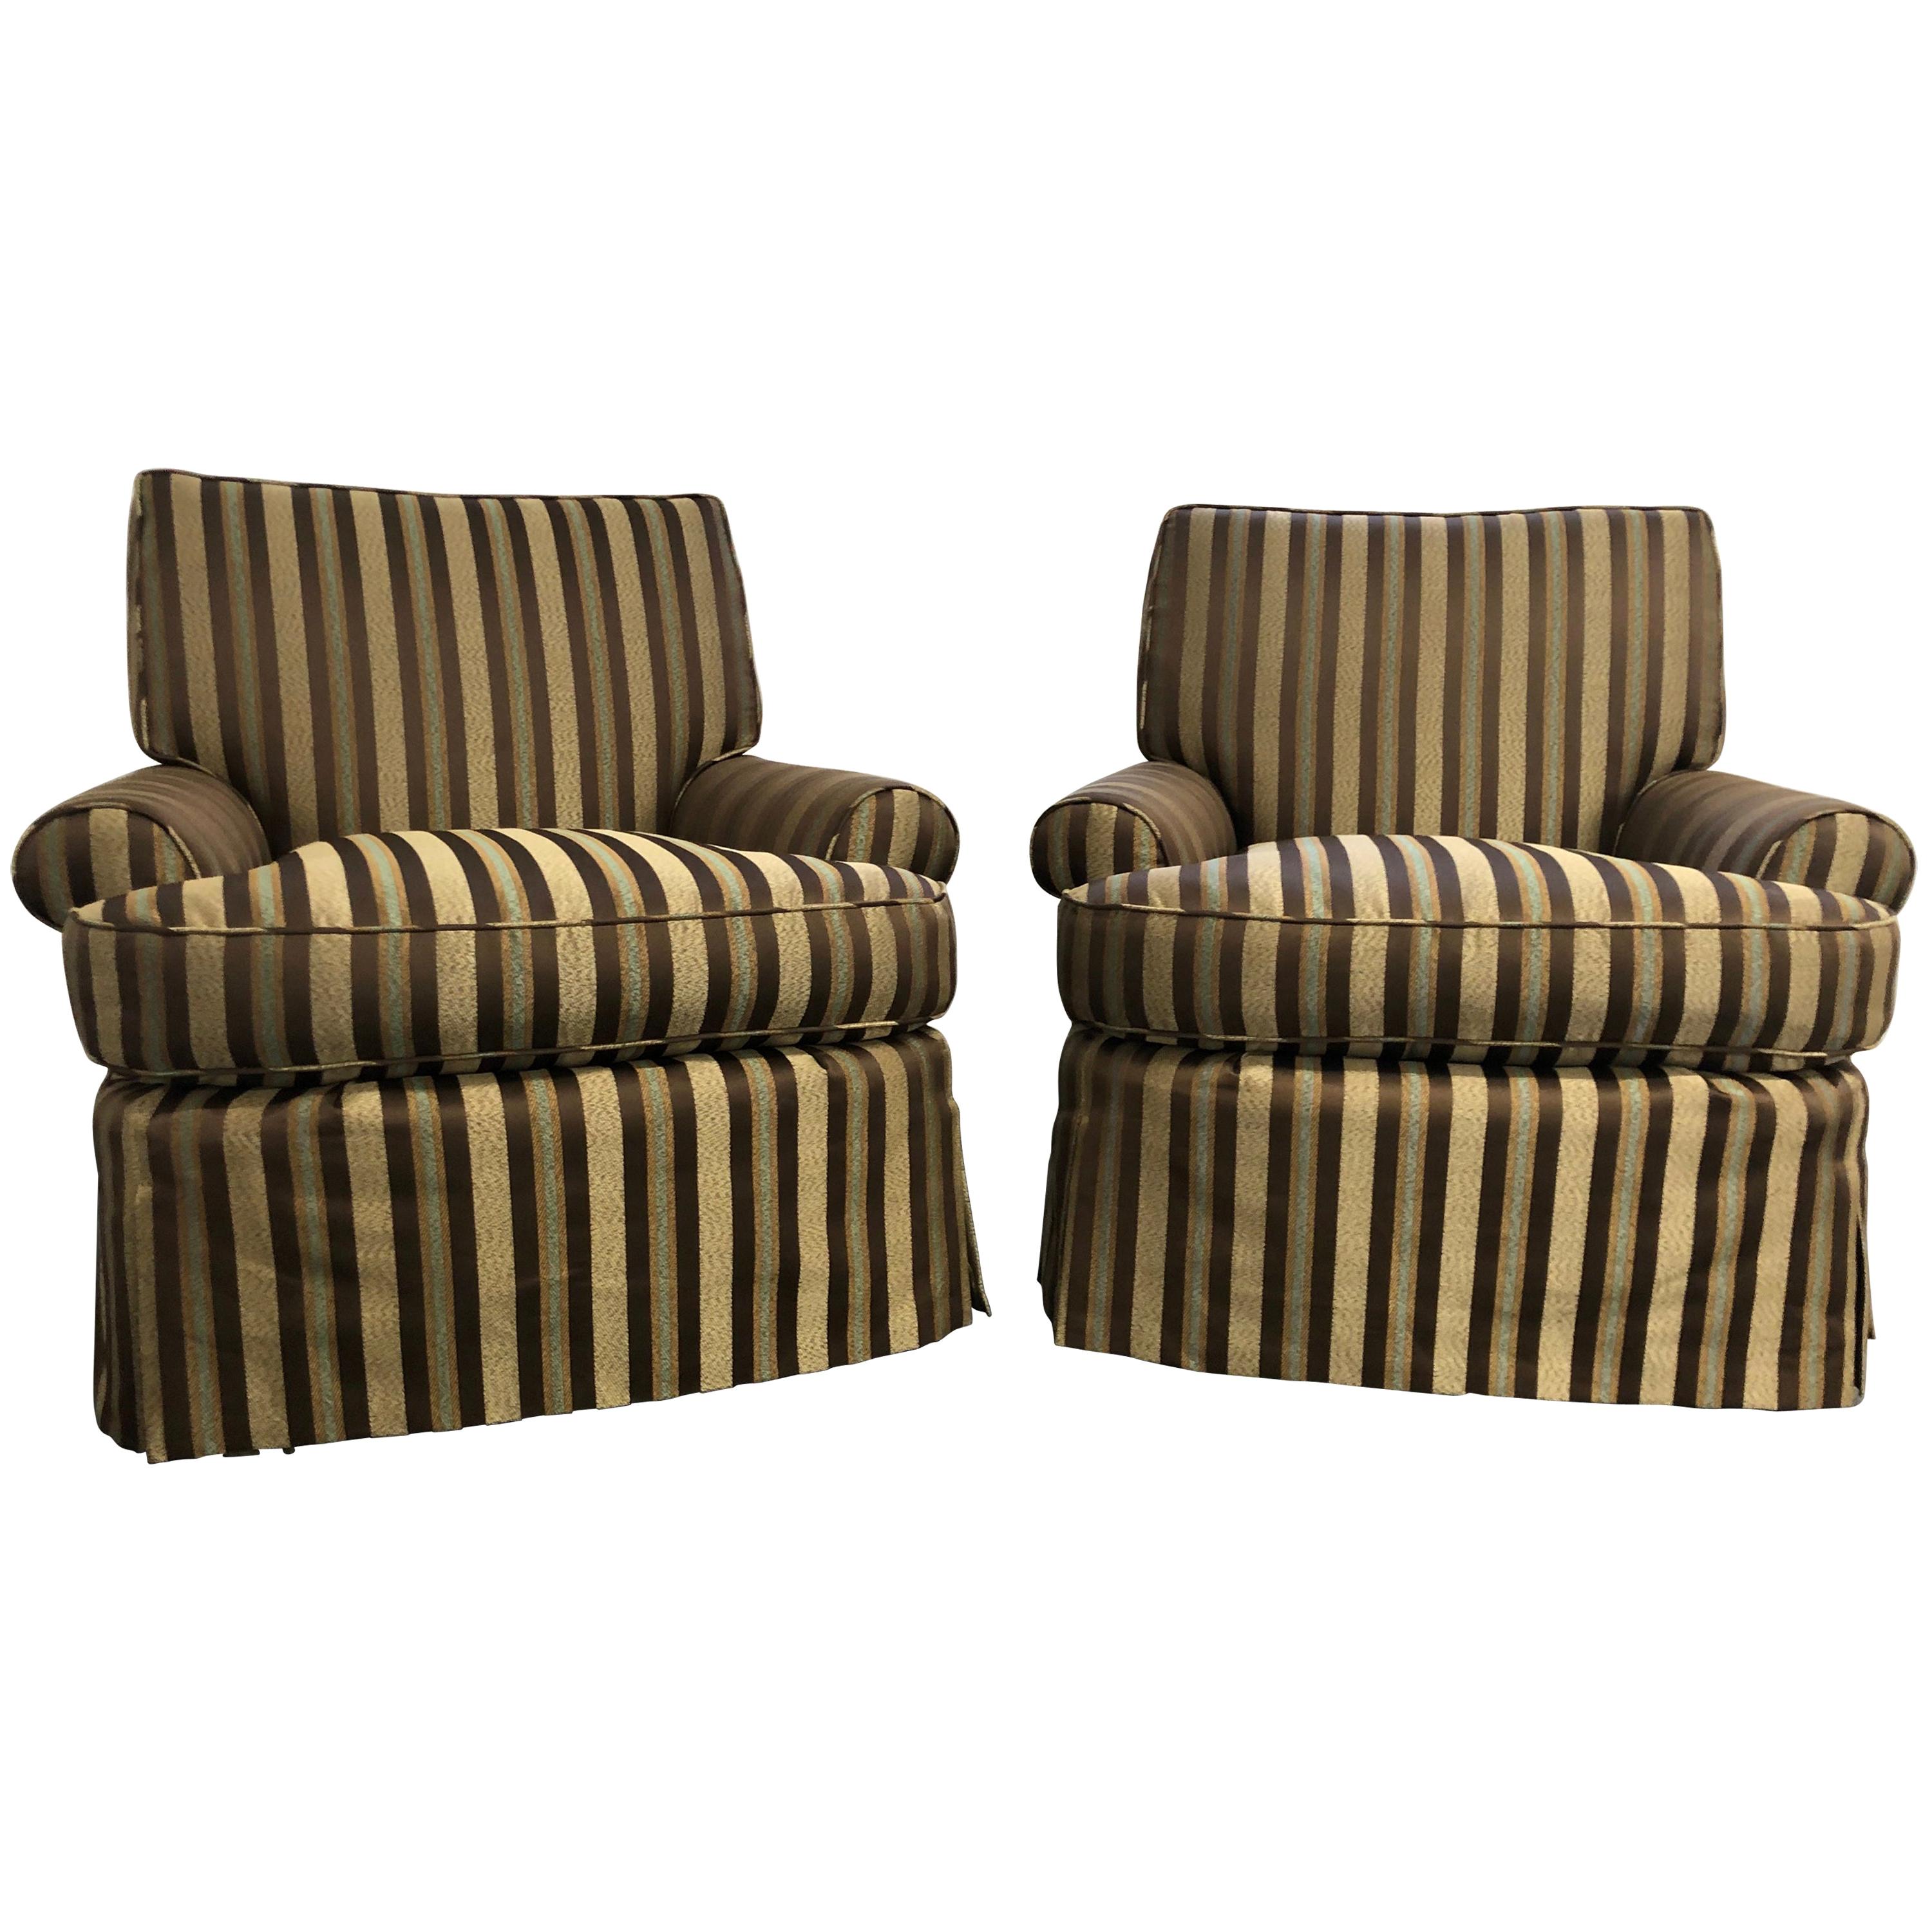 Elegant and Comfortable Pair of Club Casters in a Classic Stripe For Sale